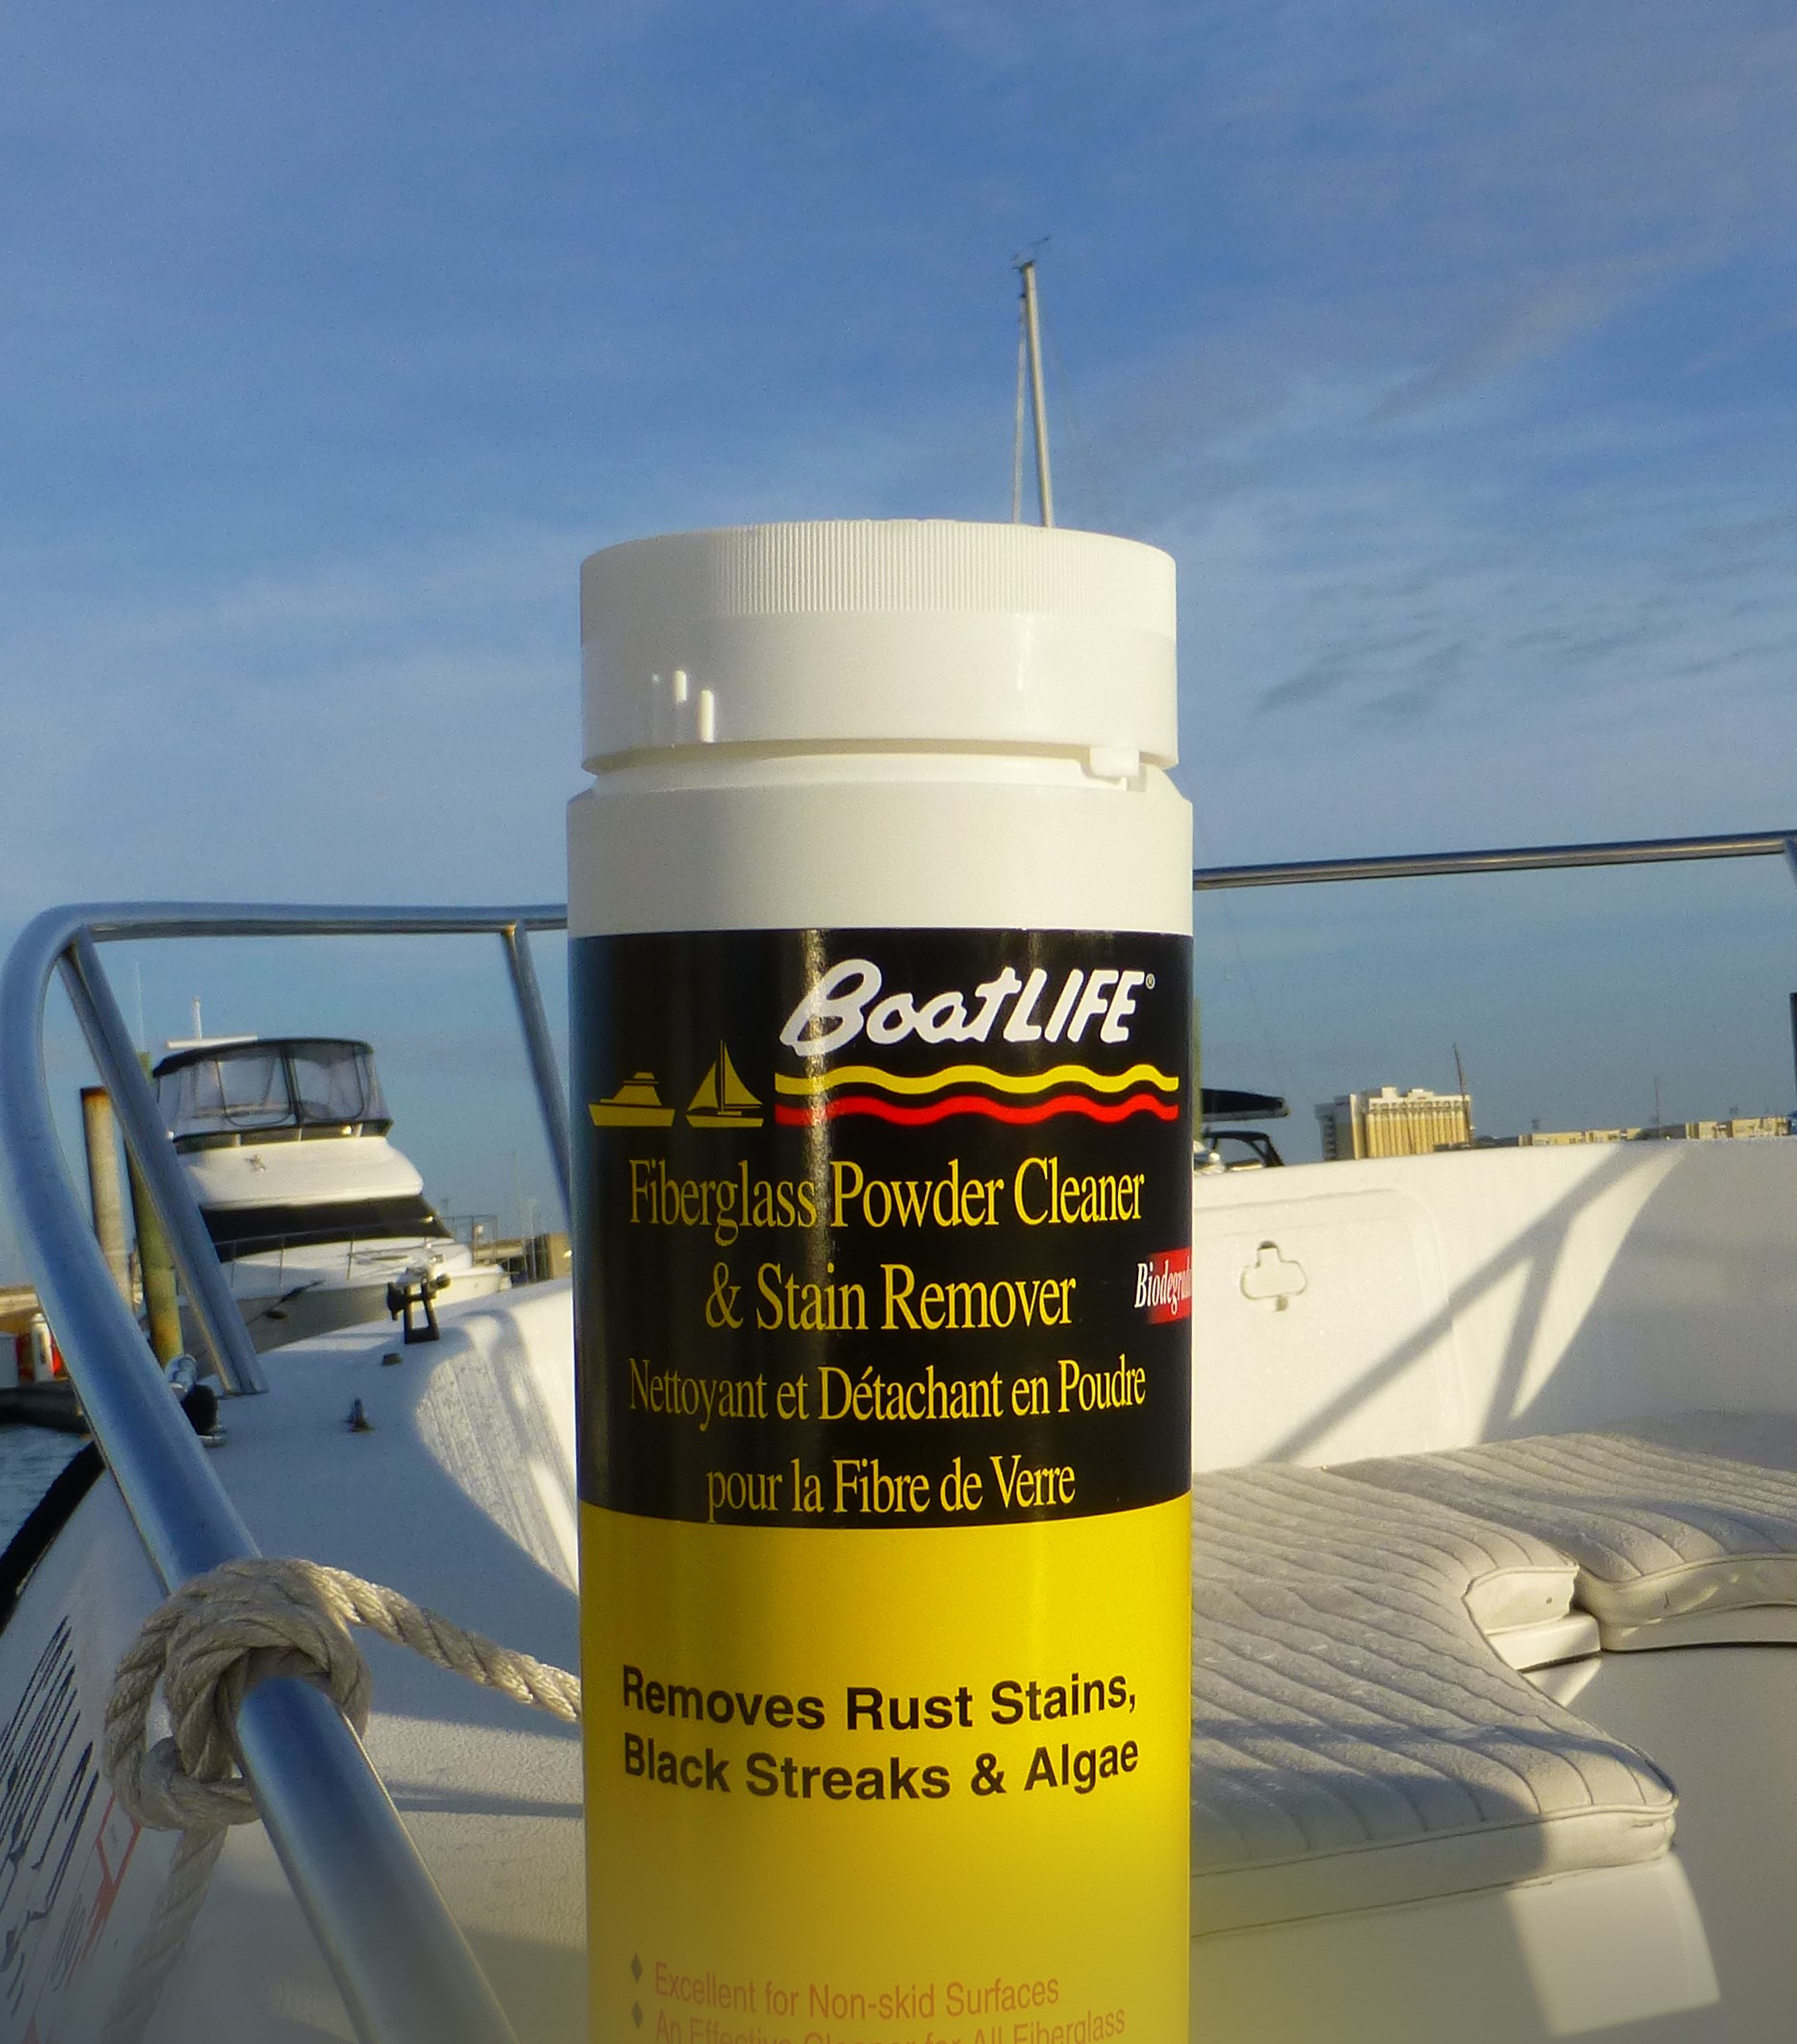 Boat LIFE Powder Cleaner